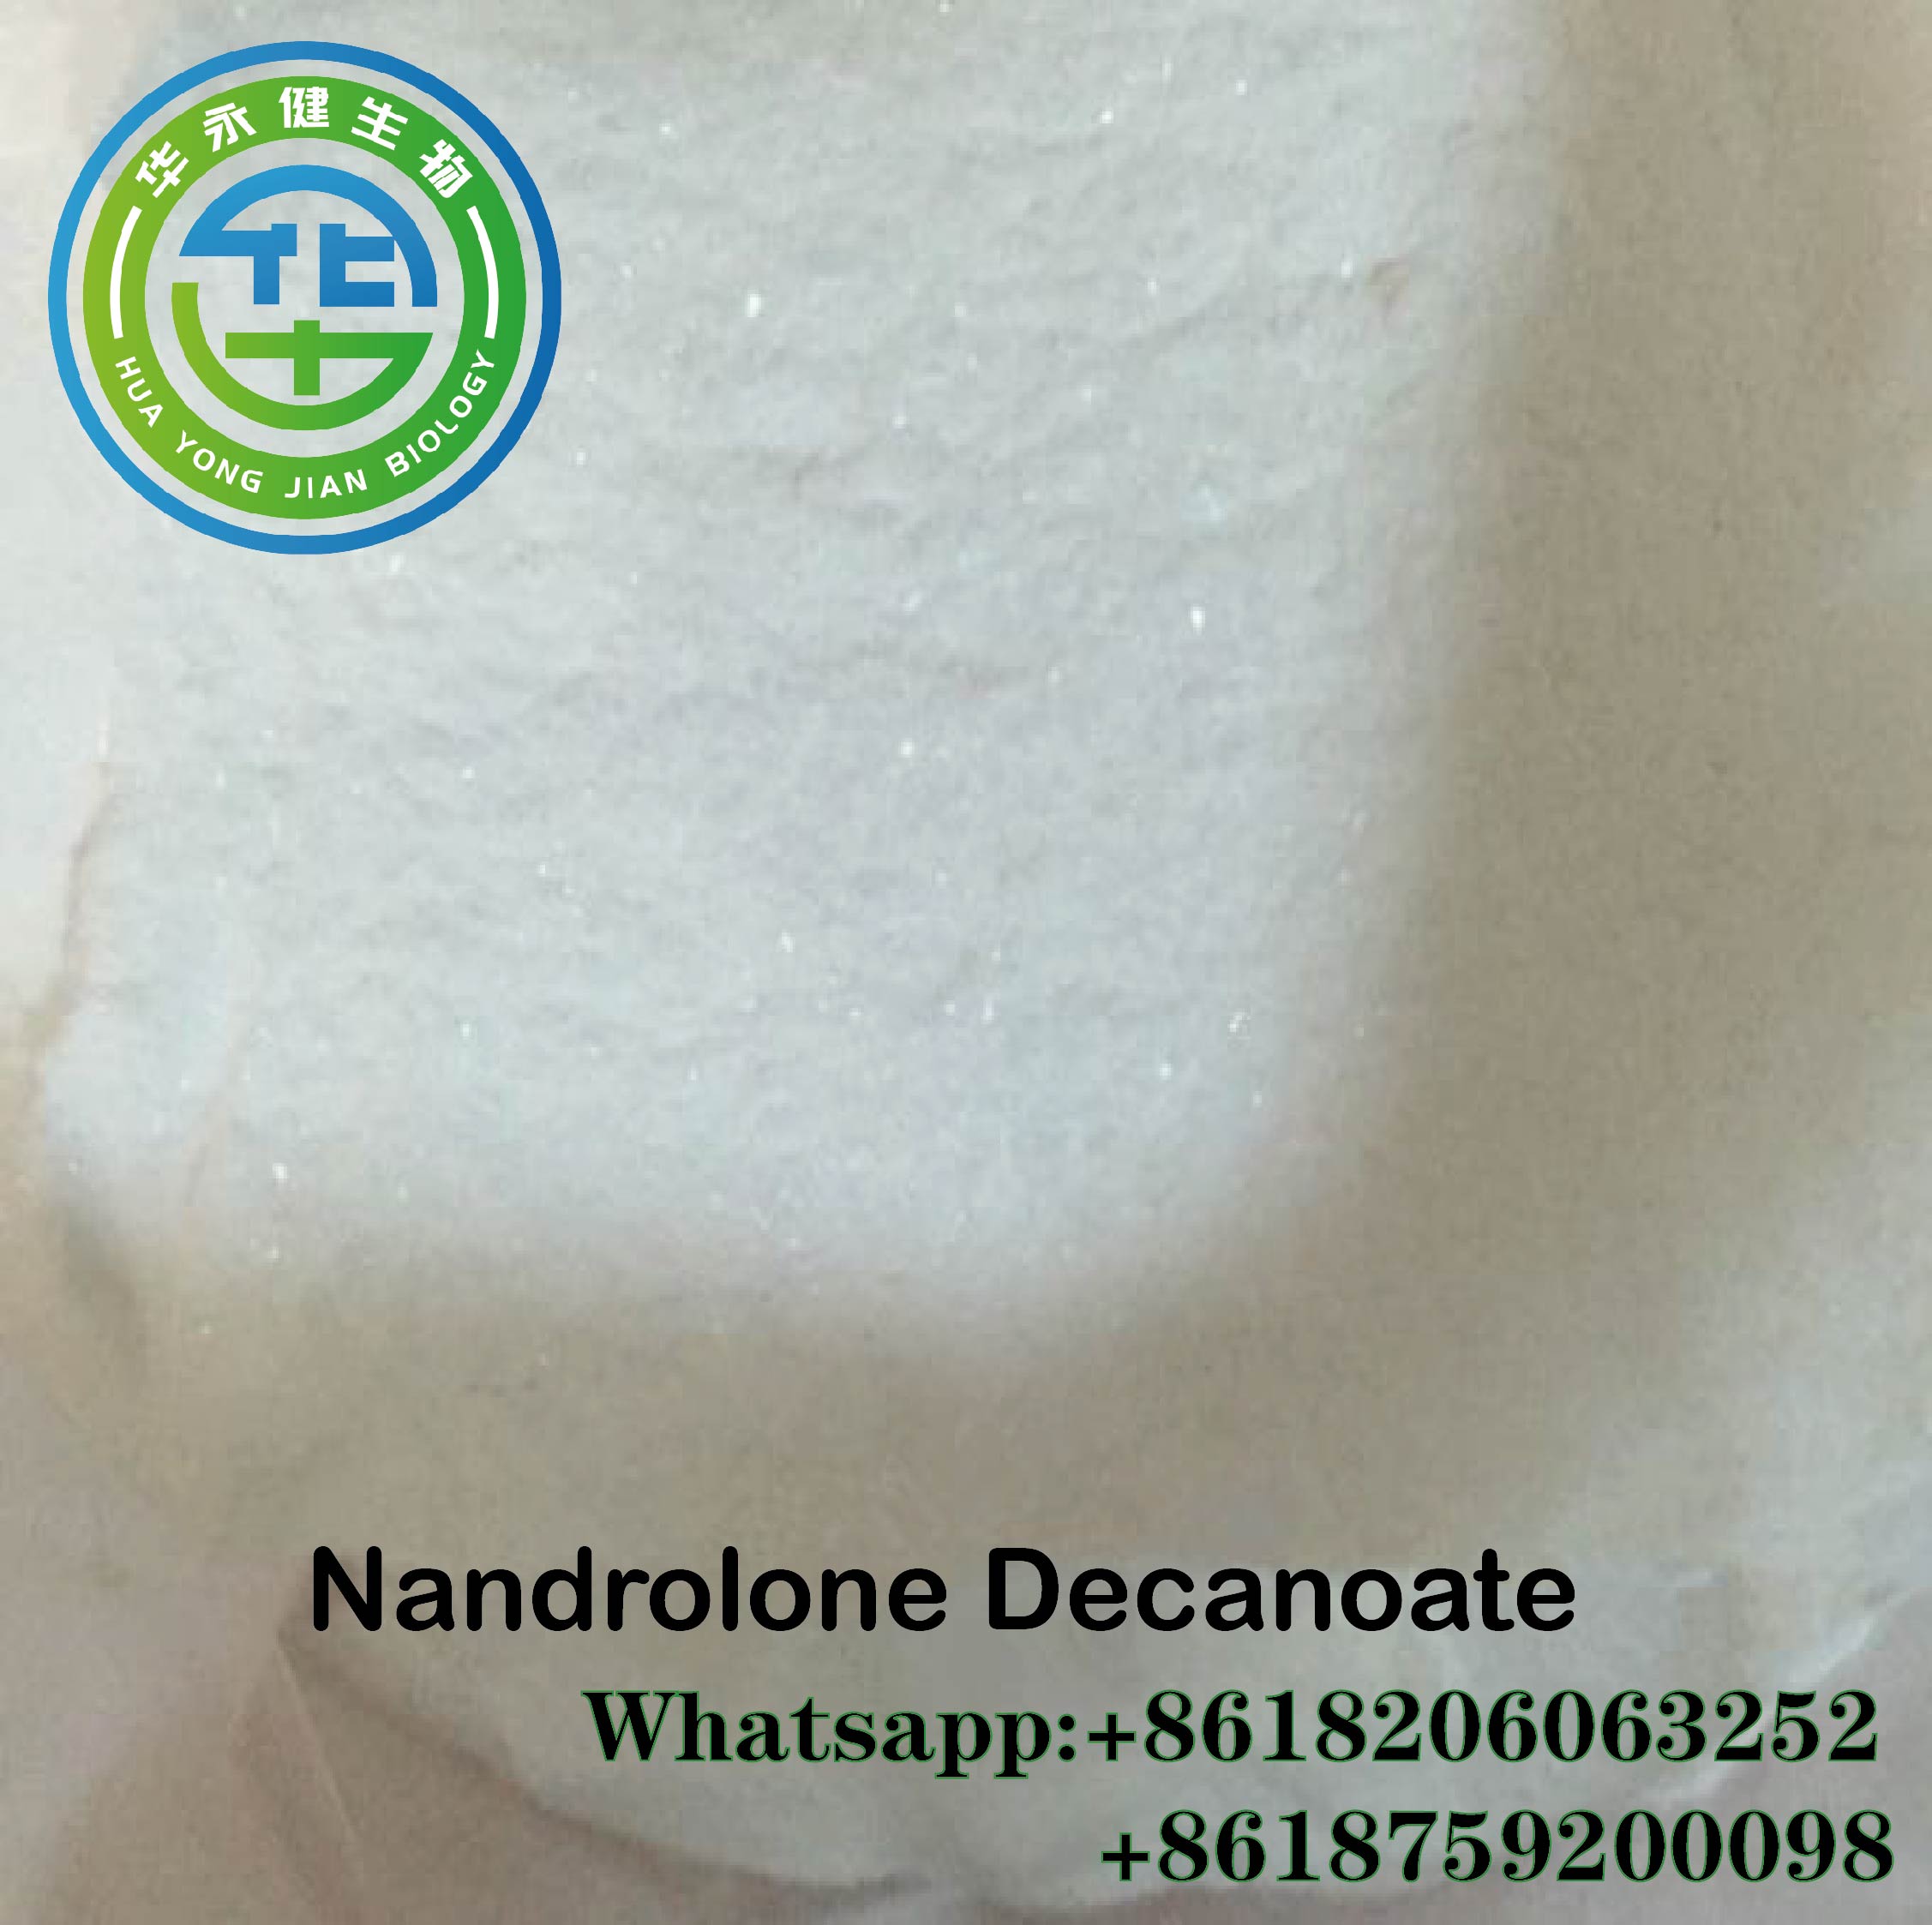 Nandrolone Decanoate /DECA Raw Steroid Powders for Muscle Growth CAS 360-70-3 